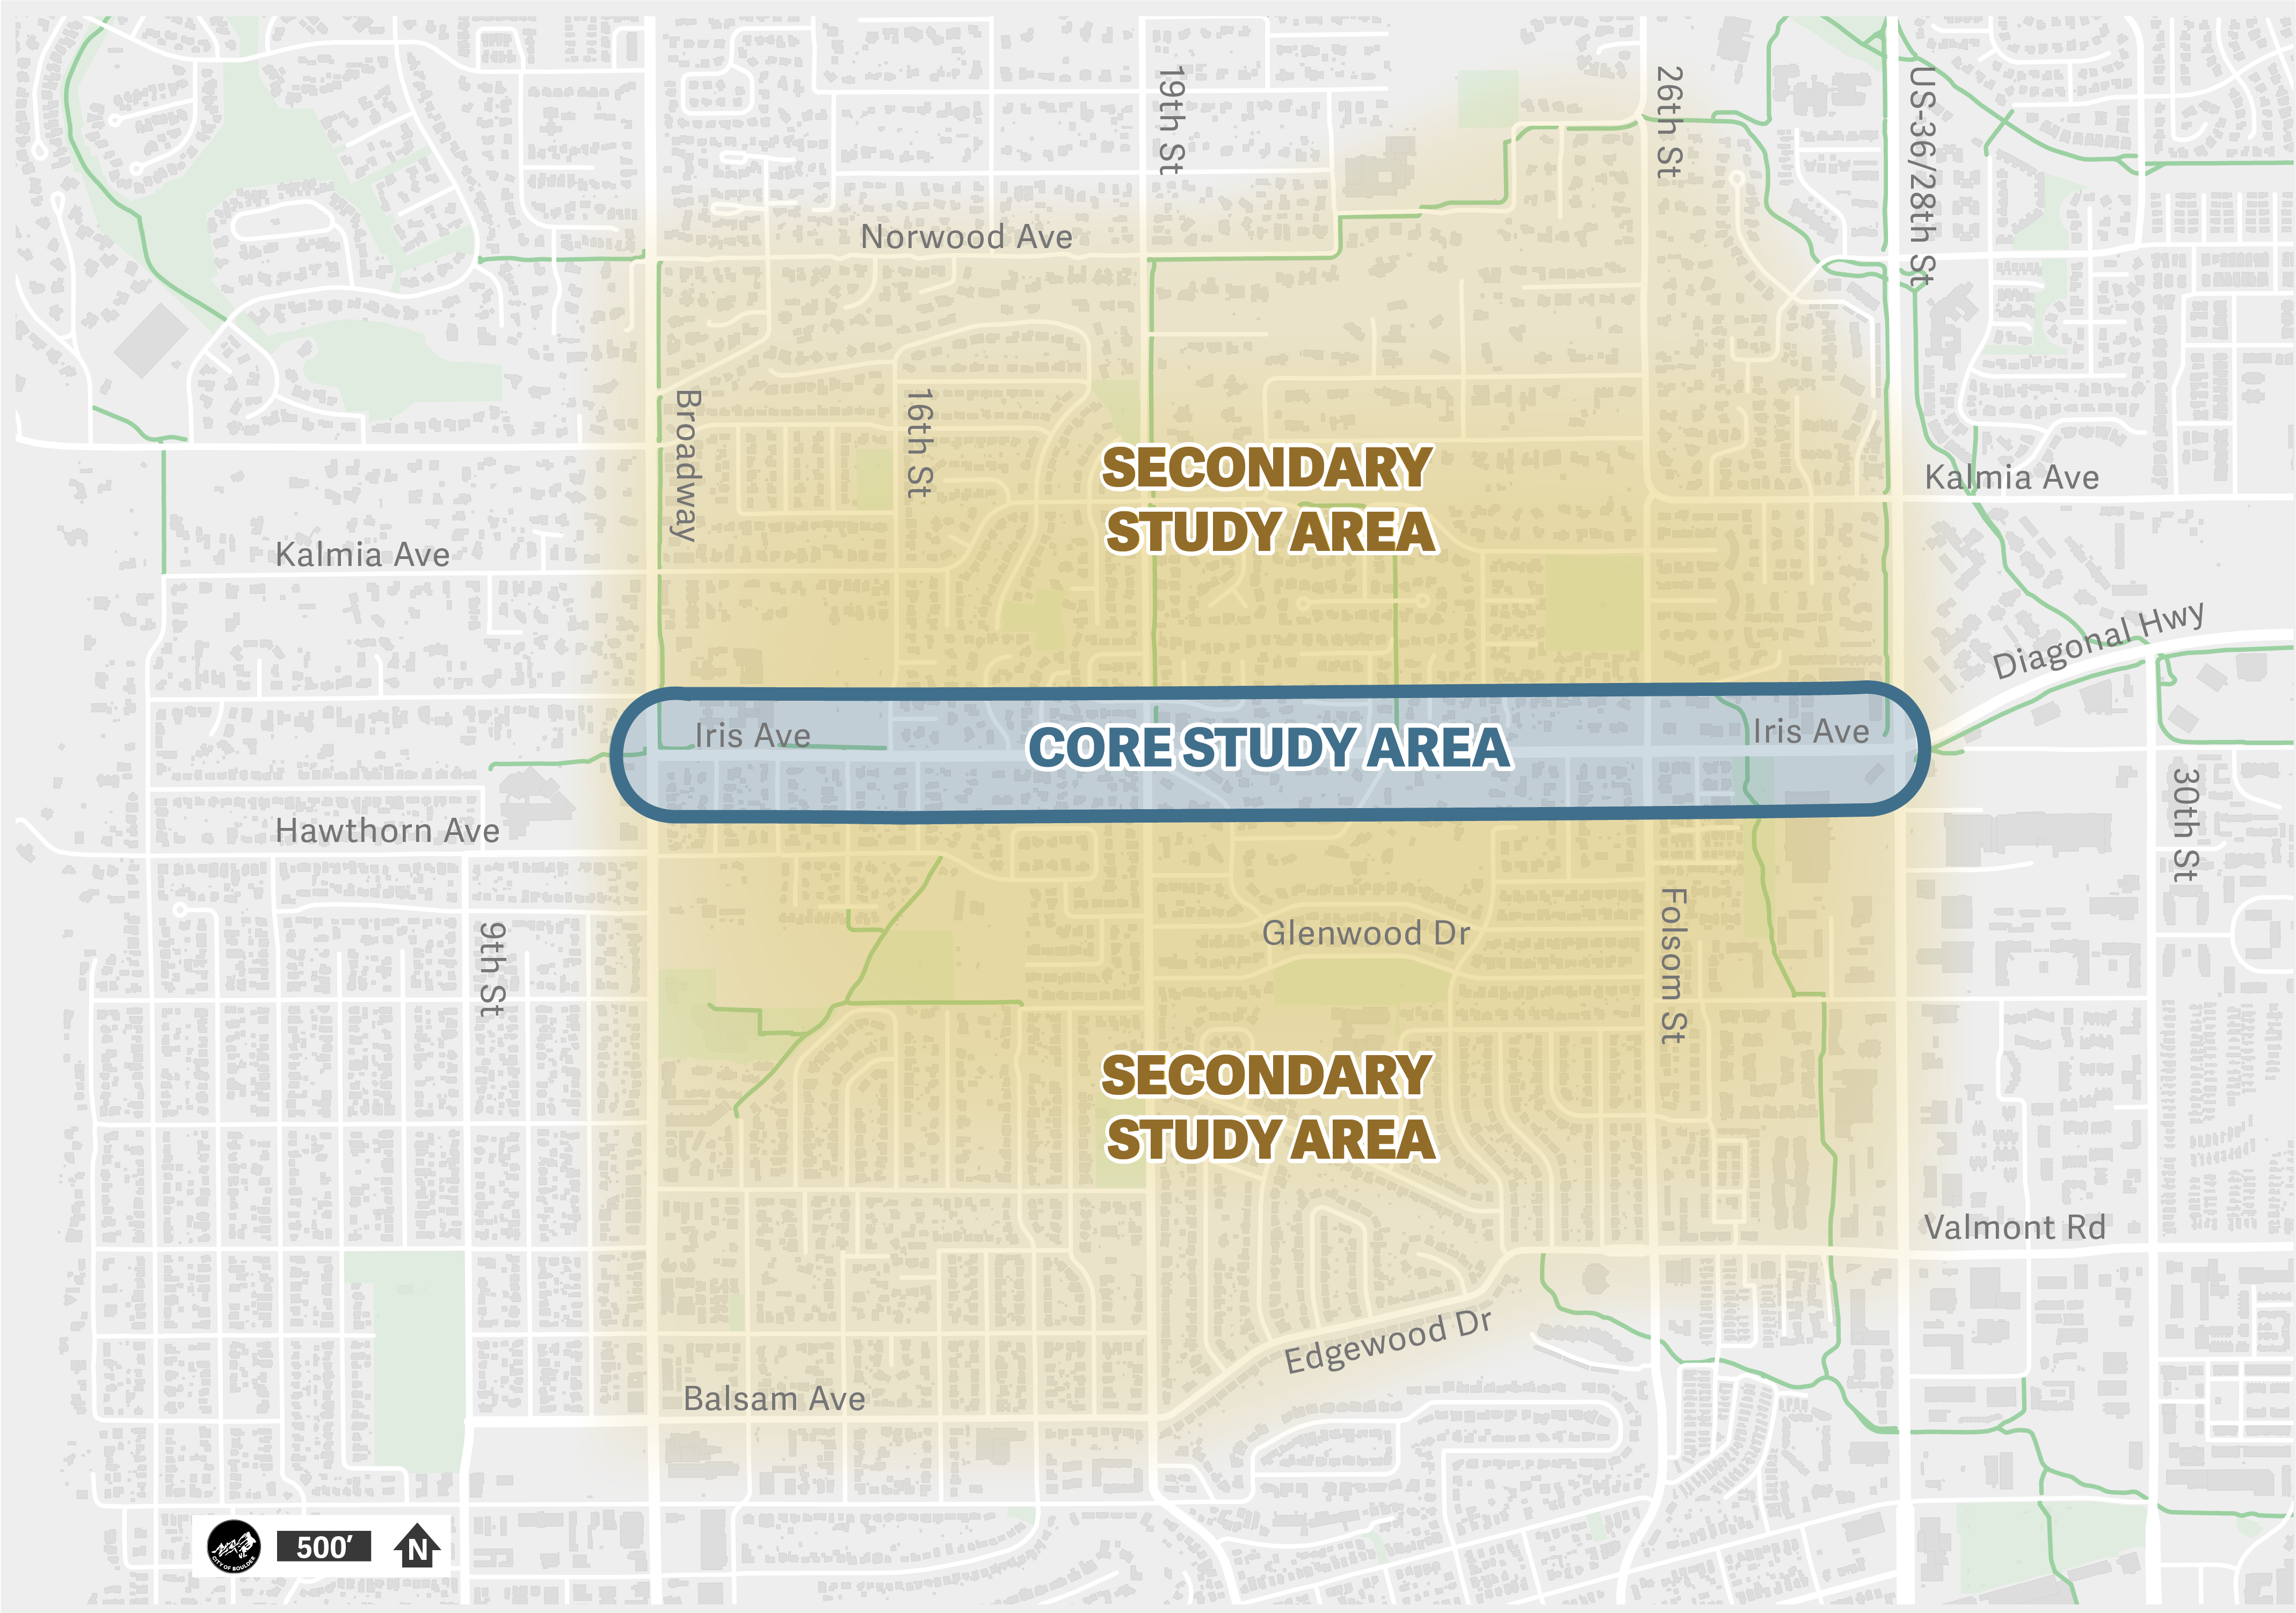 A map of the primary and secondary study area. The primary study area extends on Iris Avenue from Broadway to 28th Street. The secondary study area extends north and south of Iris Avenue from Norwood Avenue to Balsam Avenue/Edgewood Drive.